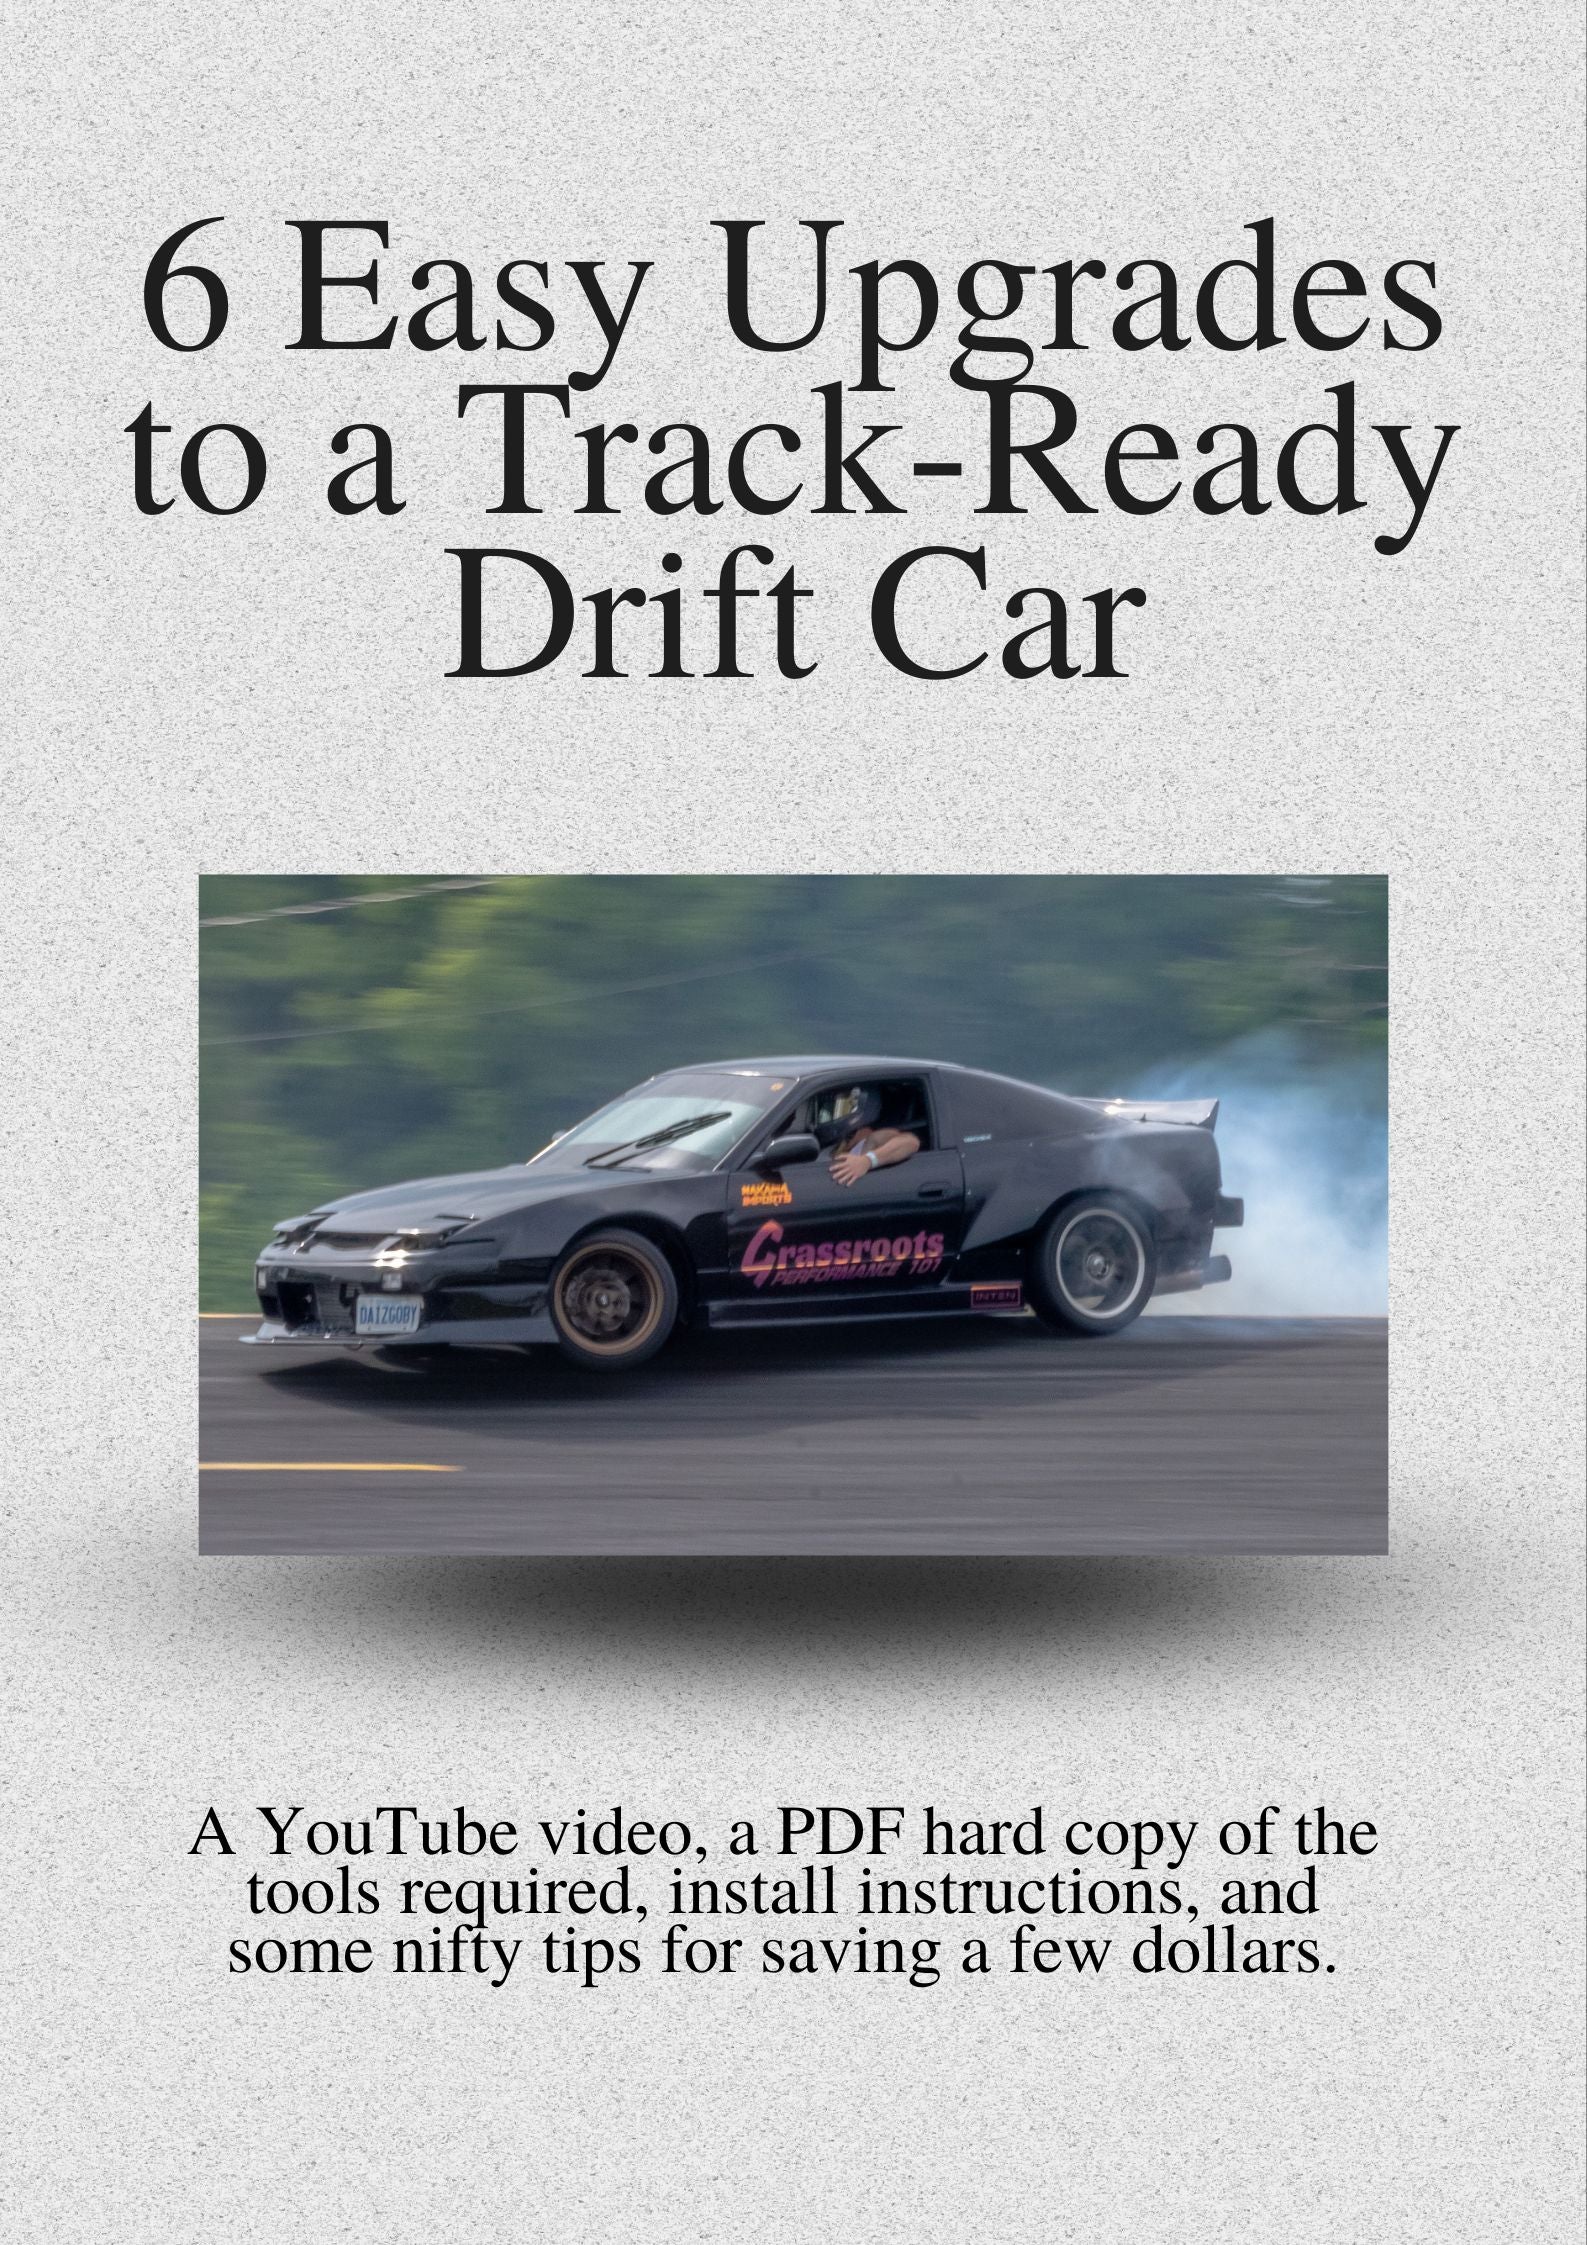 6 Easy Upgrades to a Track-Ready Drift Car